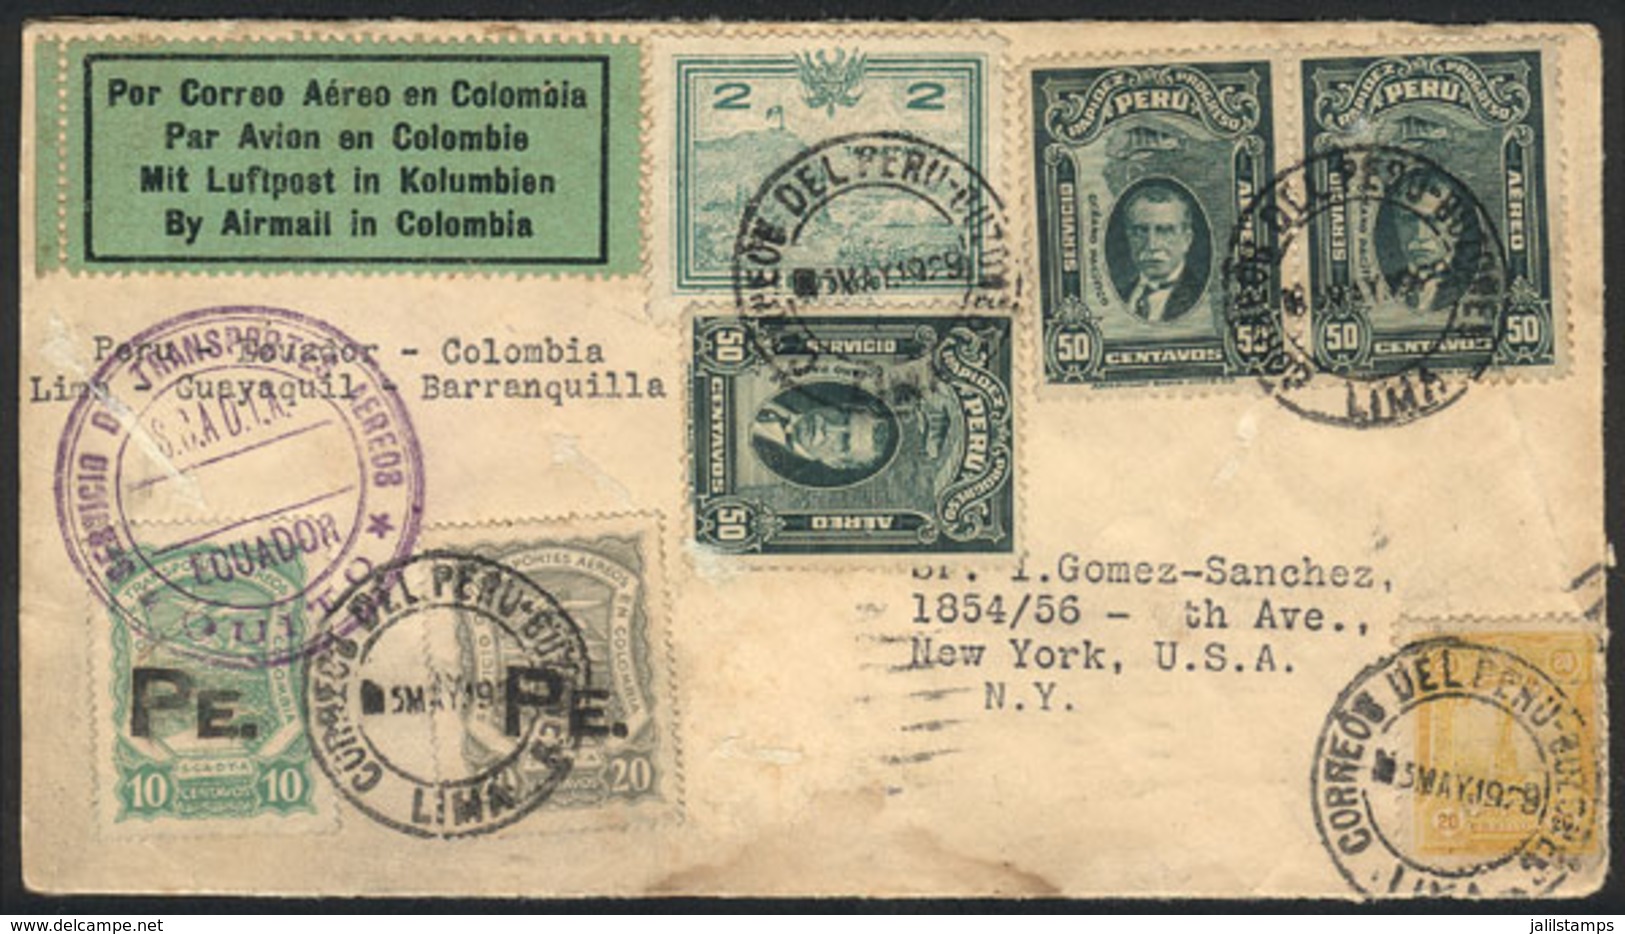 PERU: 3/MAY/1929 Lima - New York, Cover Carried On Experimental Flight To Cristobal, With Mixed Postage Of Peru Stamps A - Perú